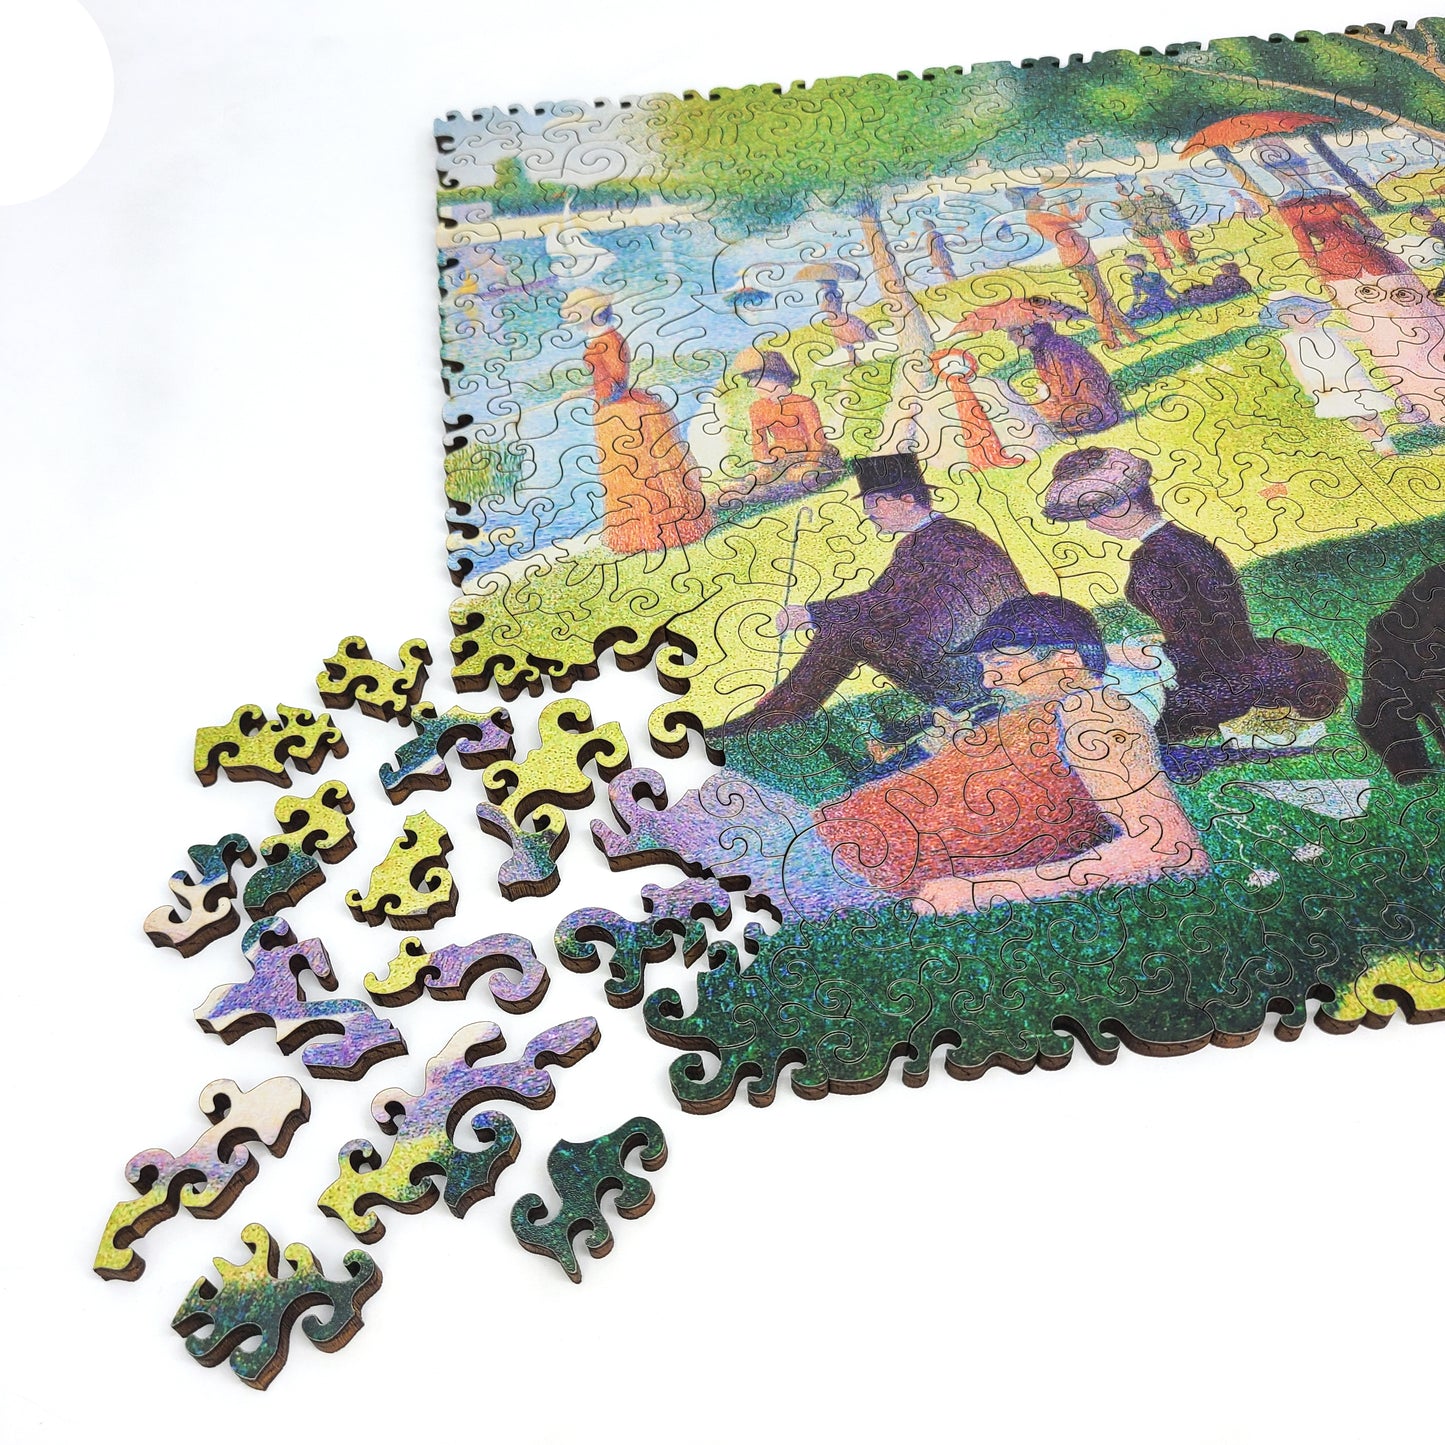 Wooden Jigsaw Puzzle with Uniquely Shaped Pieces for Adults - 440 Pieces - A Sunday Afternoon on the Island of La Grande Jatte